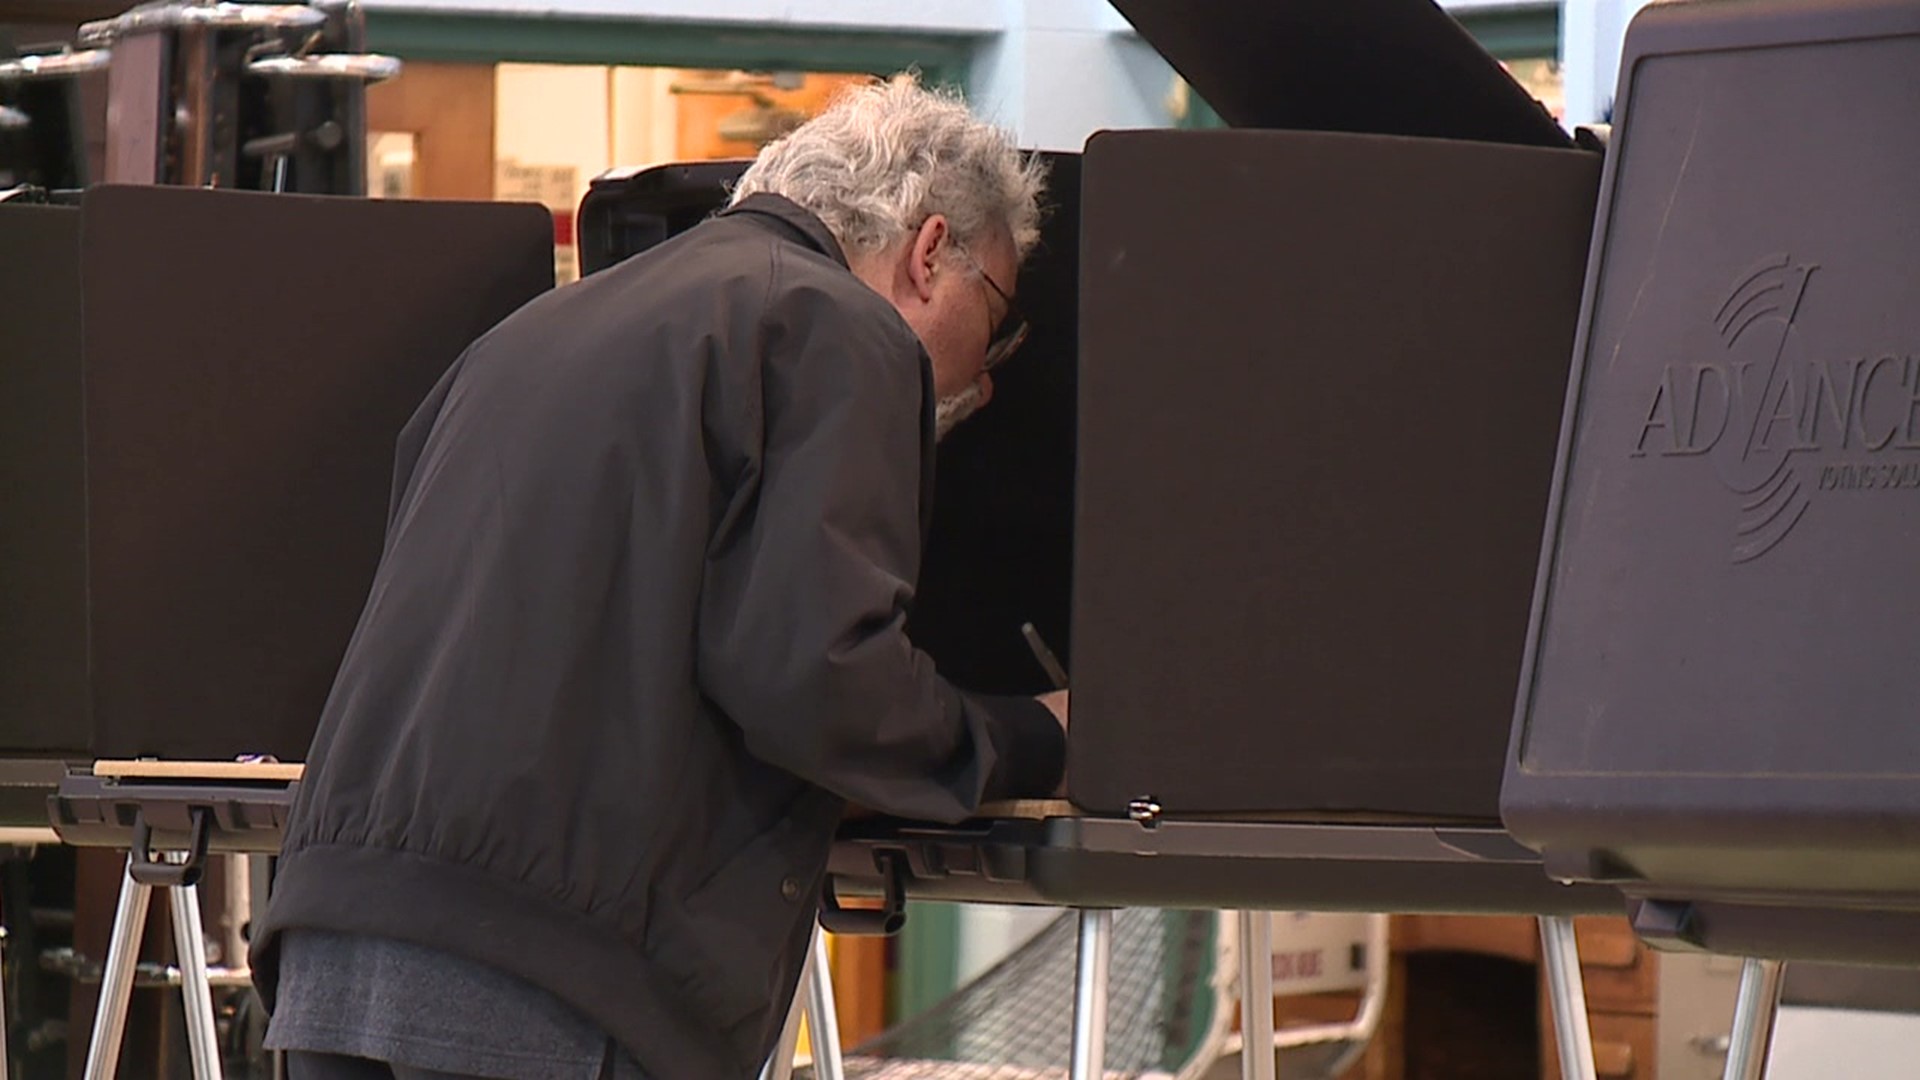 Voters in Scranton have a full ballot that includes races affected by redistricting.